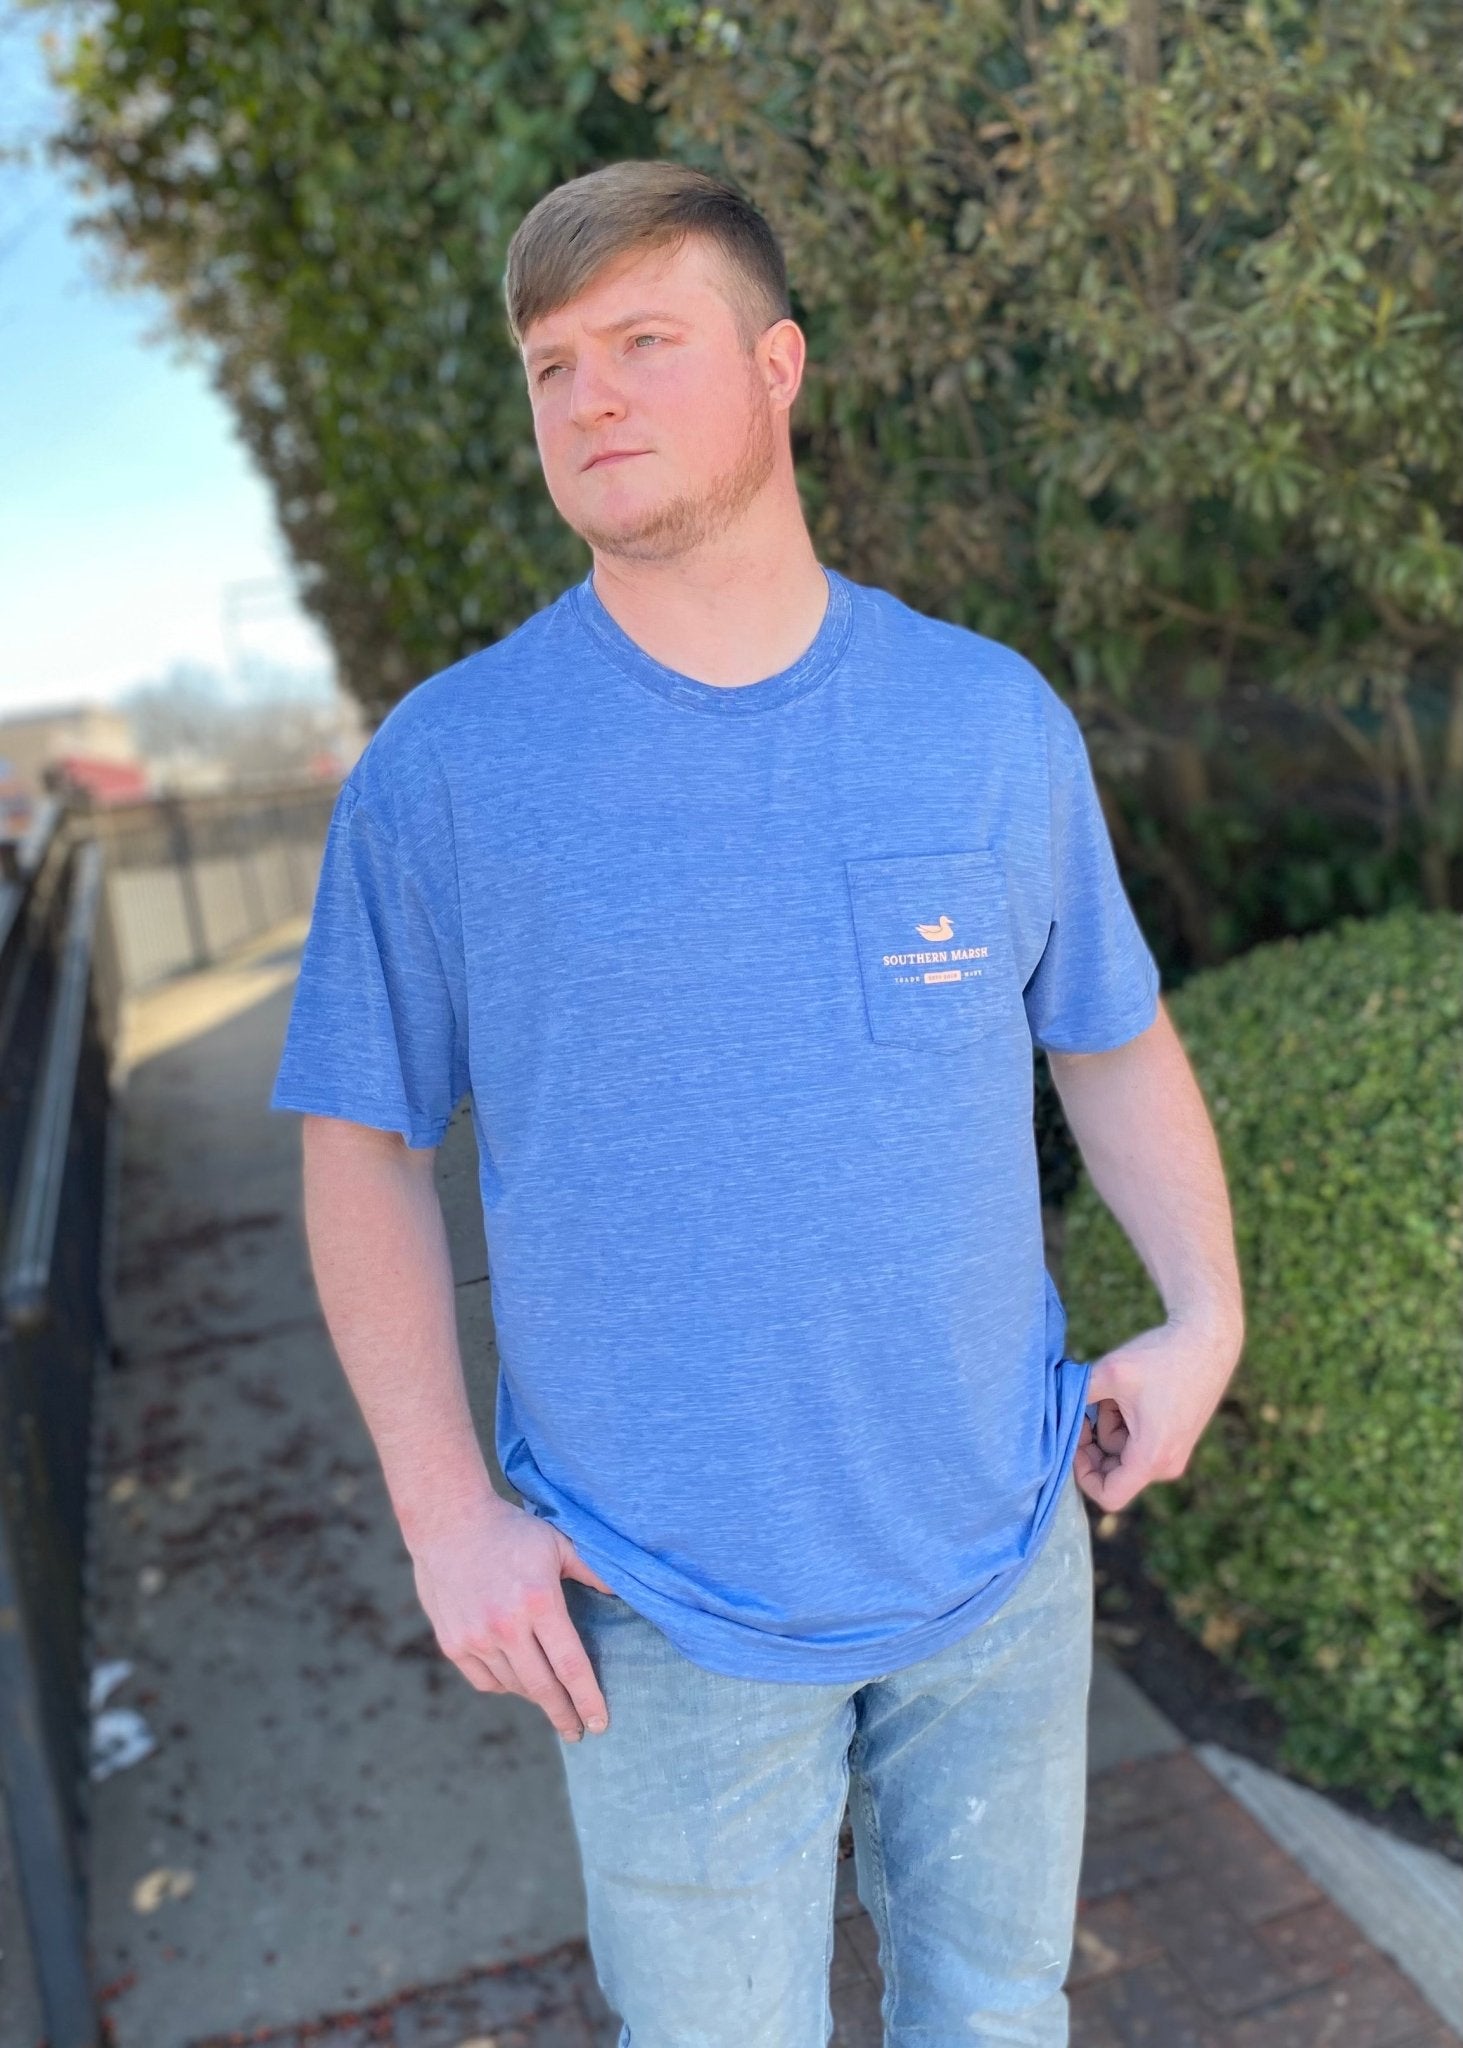 Southern Marsh FieldTec Heather Tee - Marlin Time - Oxford Blue - Graphic Tee -Jimberly's Boutique-Olive Branch-Mississippi